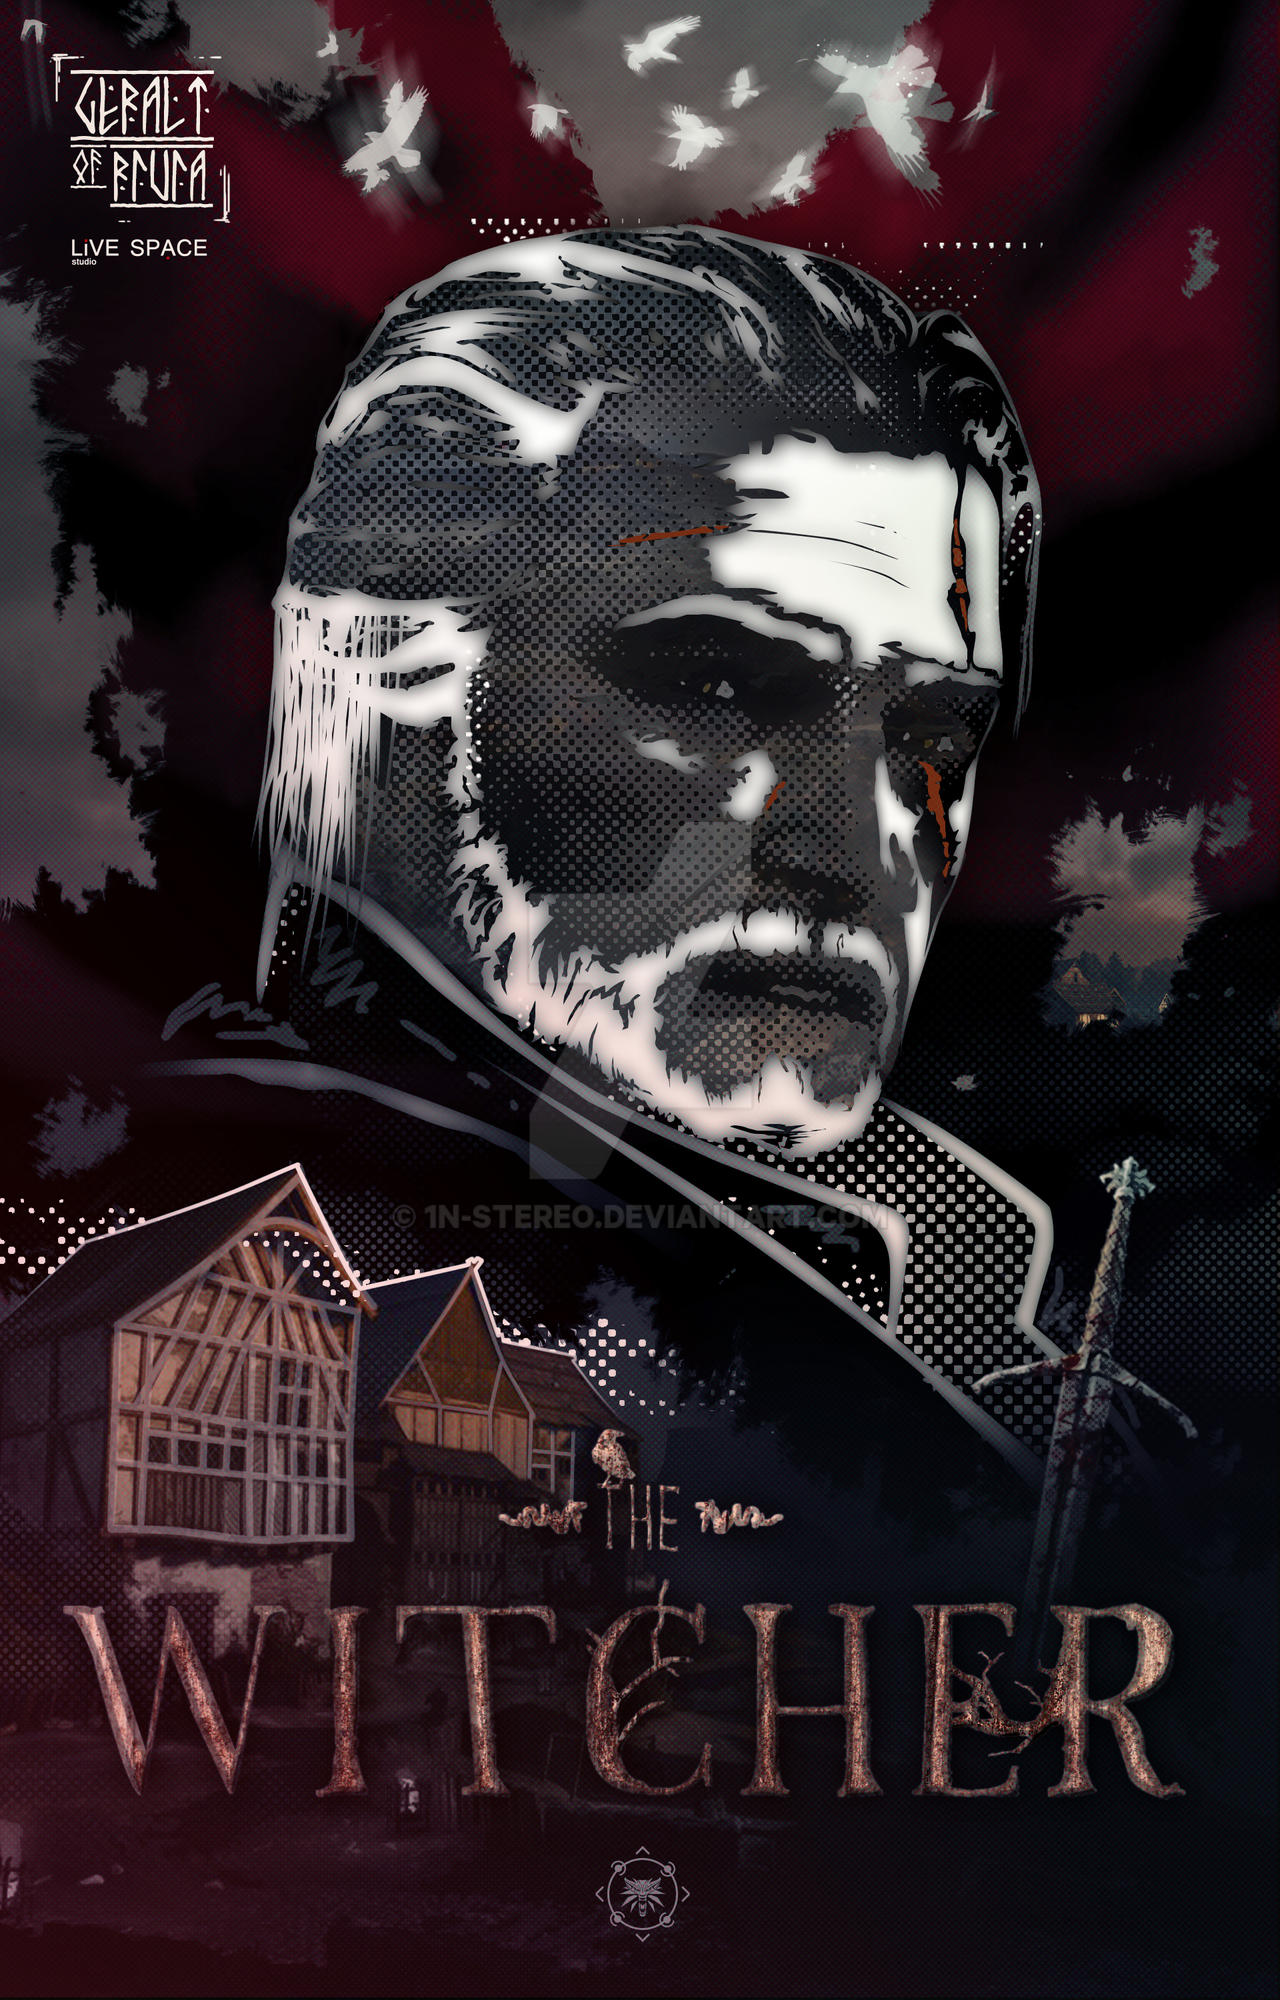 LS The Witcher 3 poster by 1n-StereO on DeviantArt